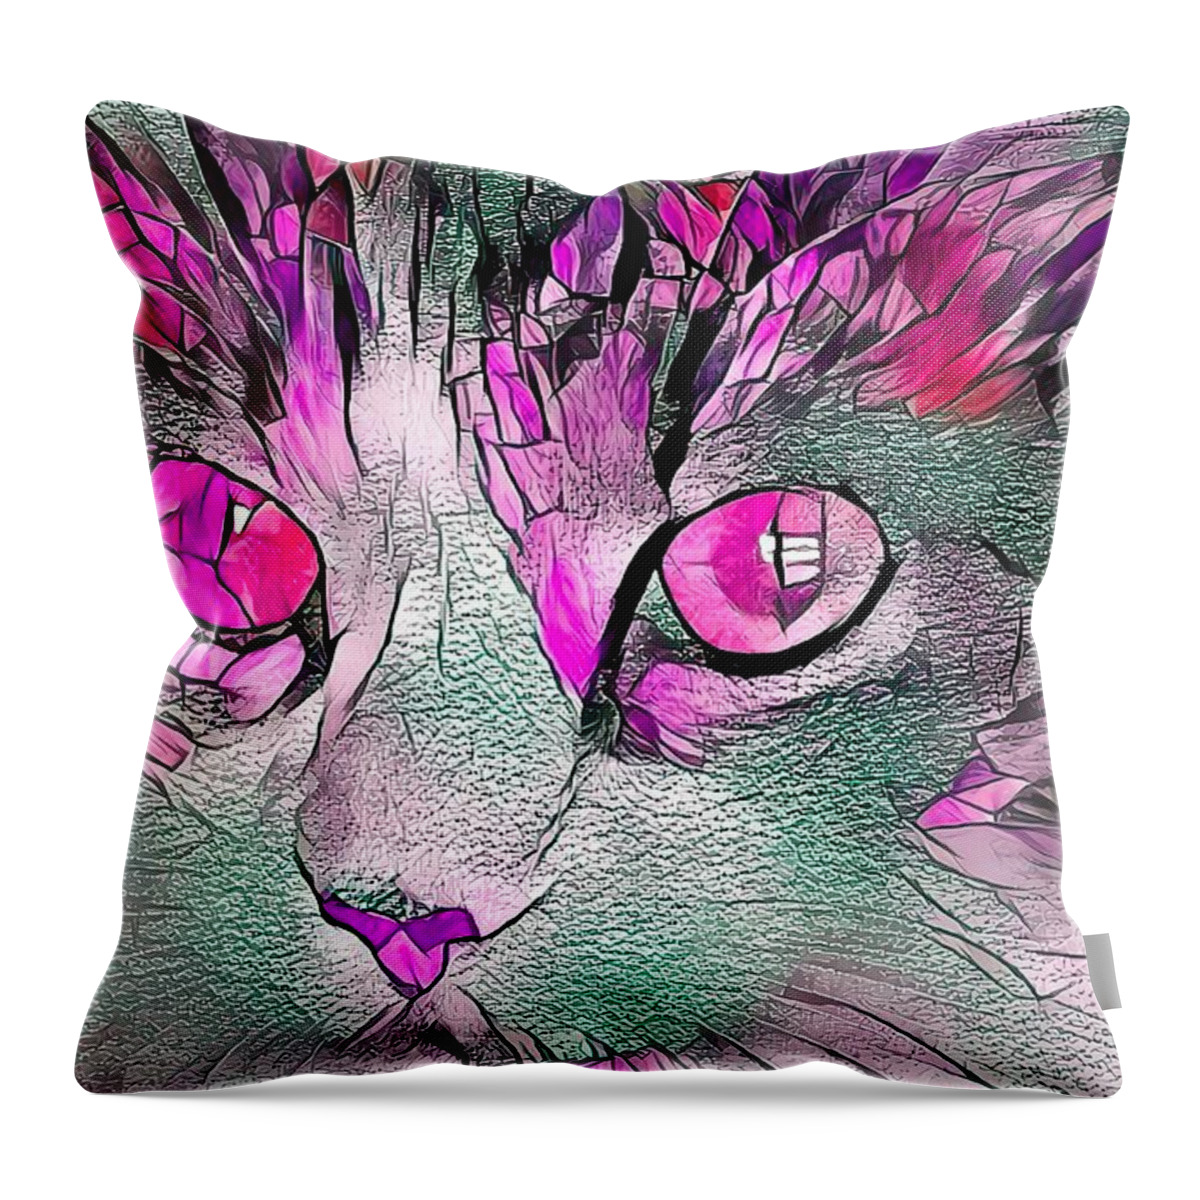 Glass Throw Pillow featuring the digital art Stained Glass Cat Portrait Pinkish Purple by Don Northup